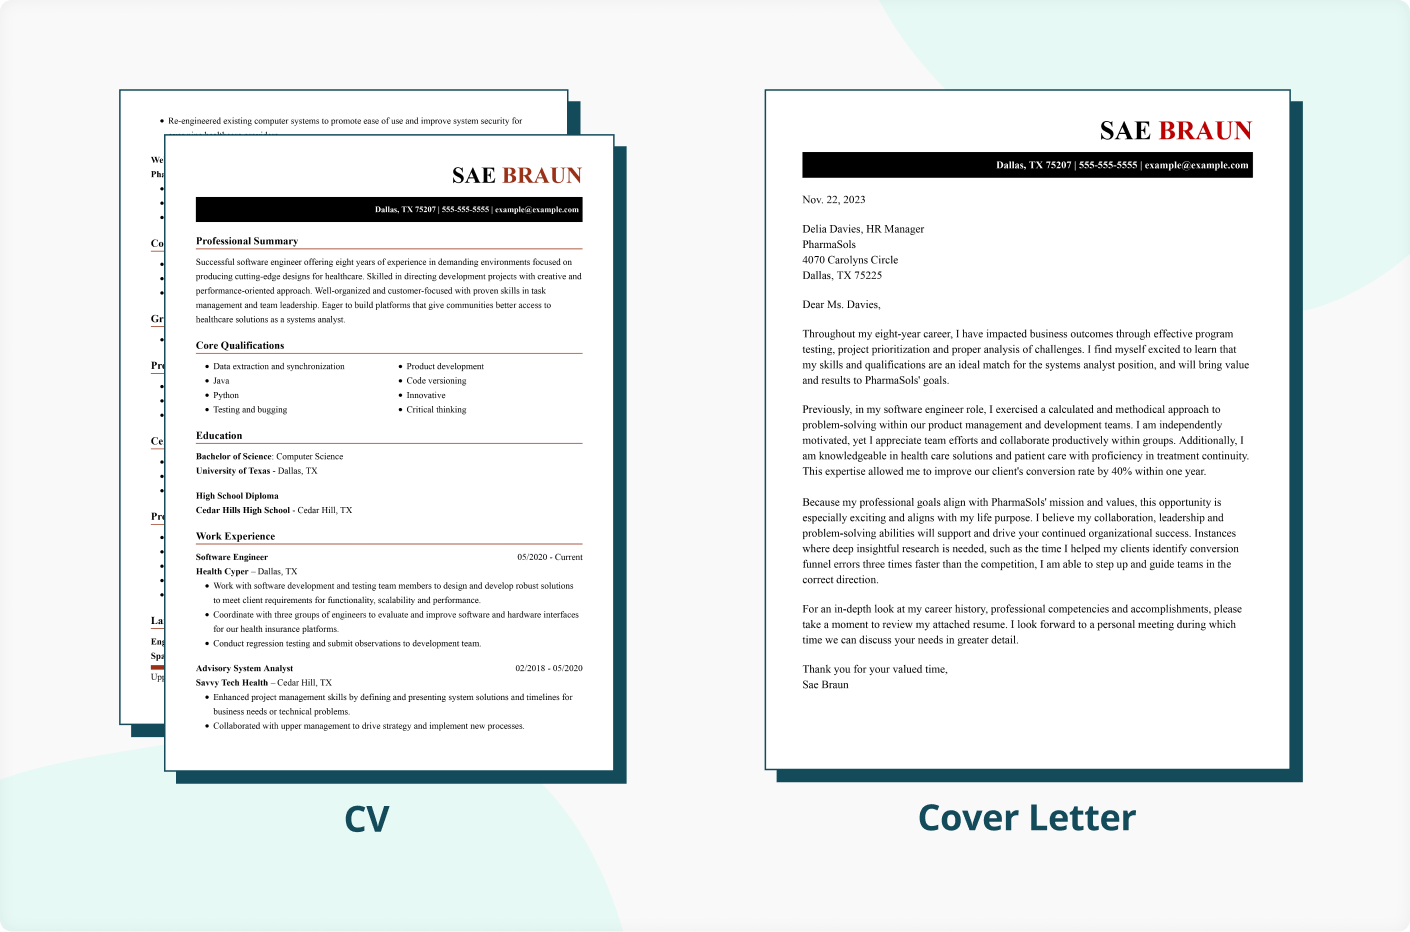 add a cover letter